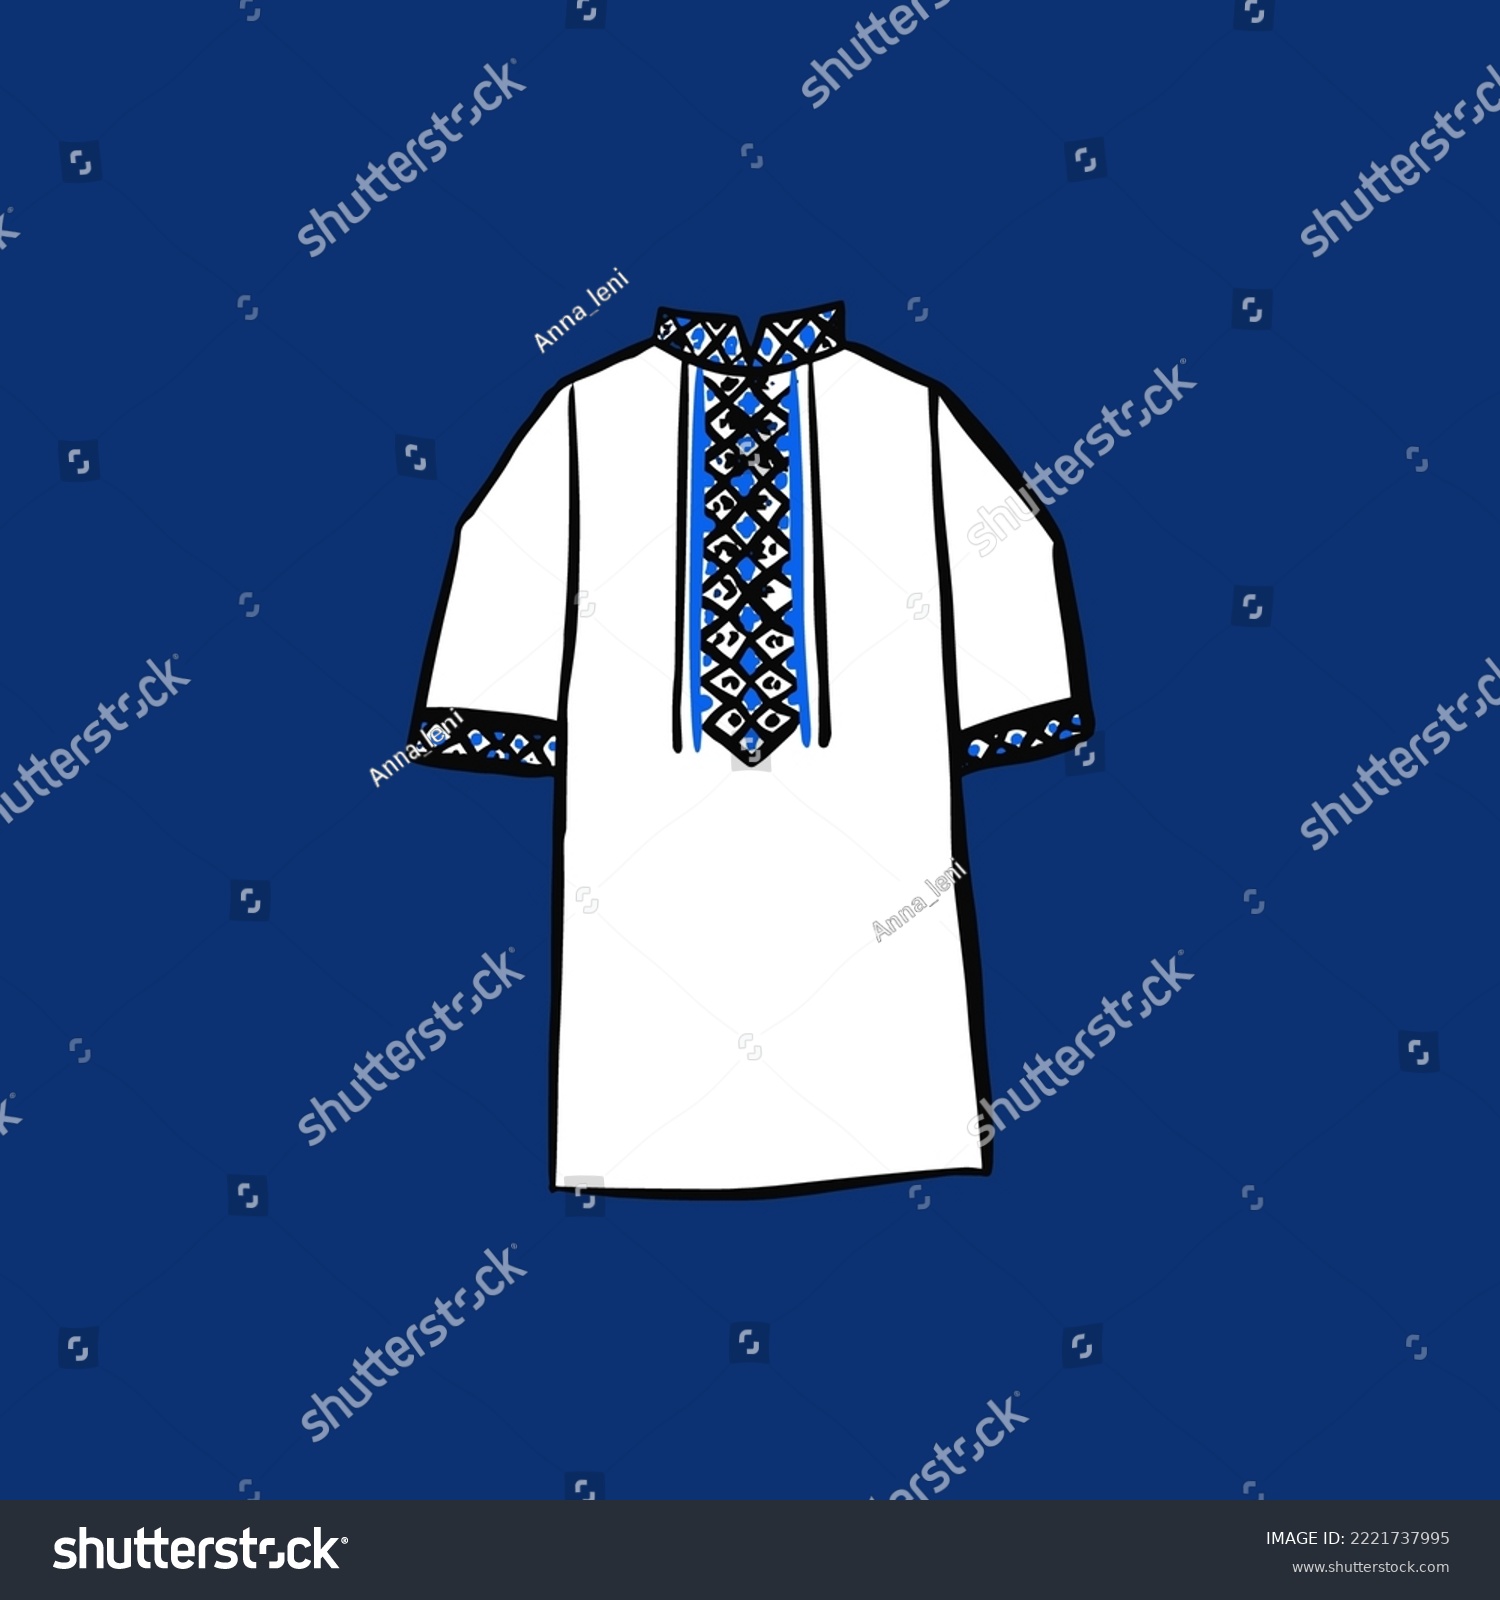 SVG of Man Ukraine Embroidery T Shirt. Vector Illustration of Sketch Doodle Hand drawn Cultural Clothes. svg